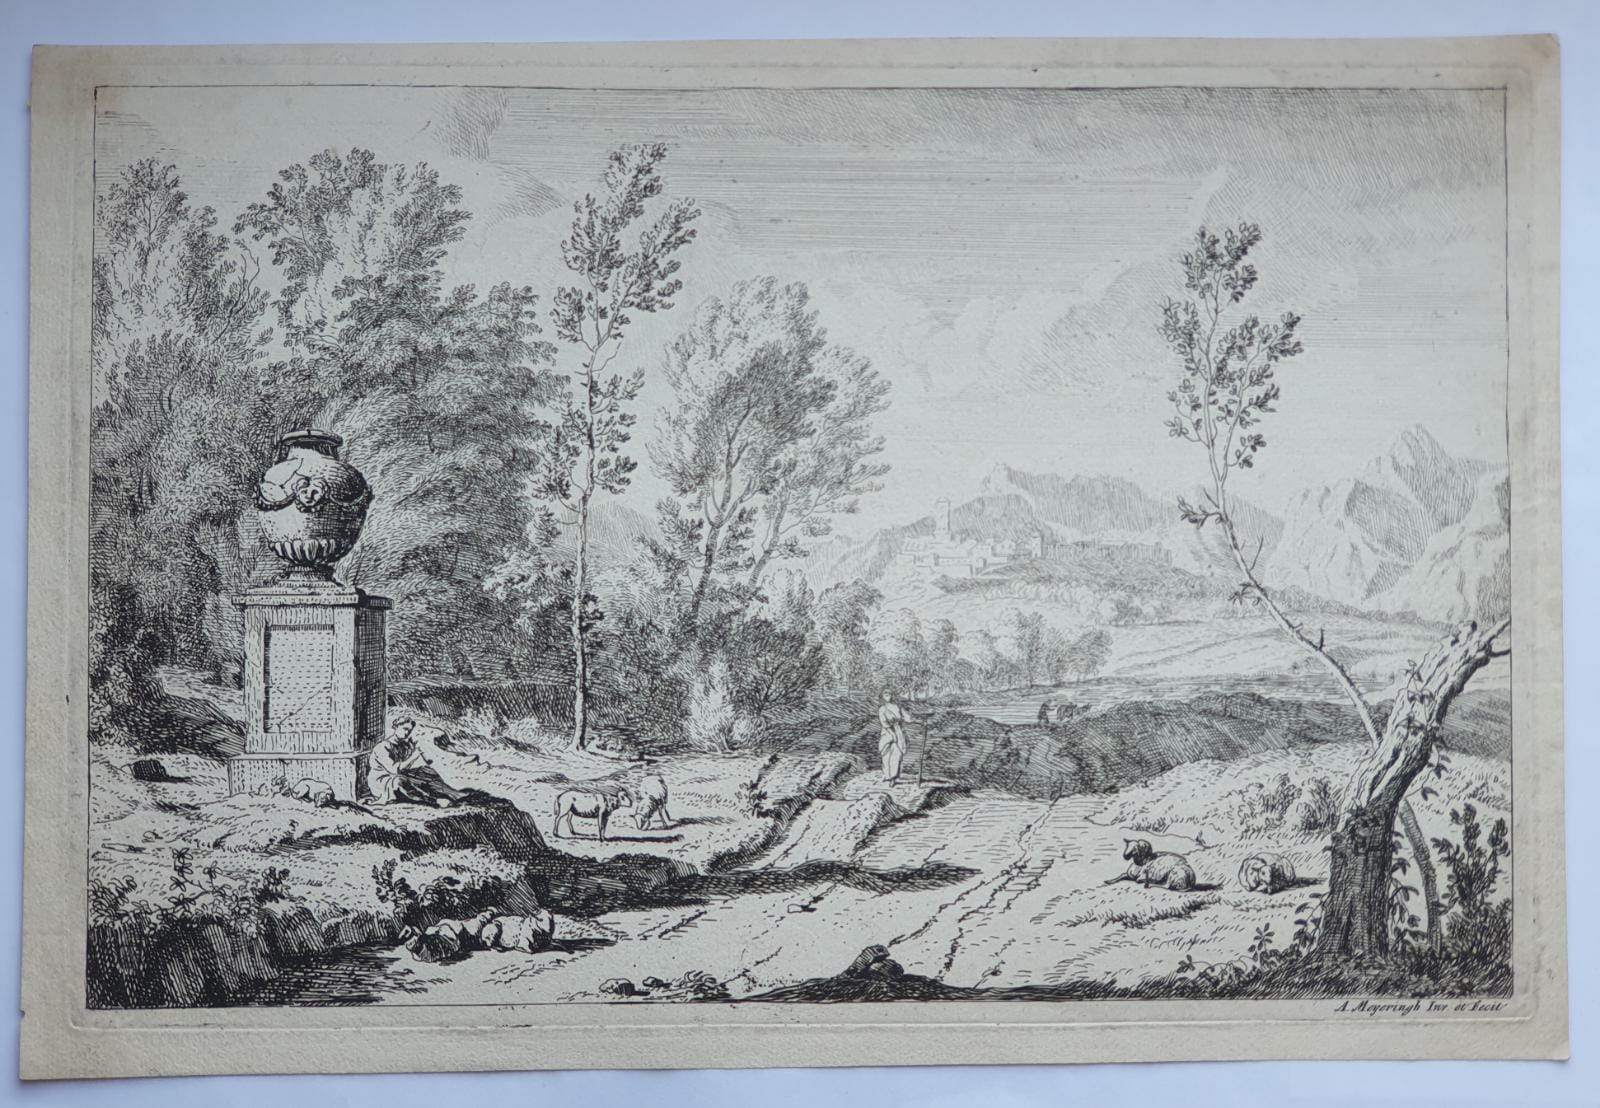 [Antique print, etching/ets] Italian landscape with a shepherd playing the flute near a monument, published before 1700.